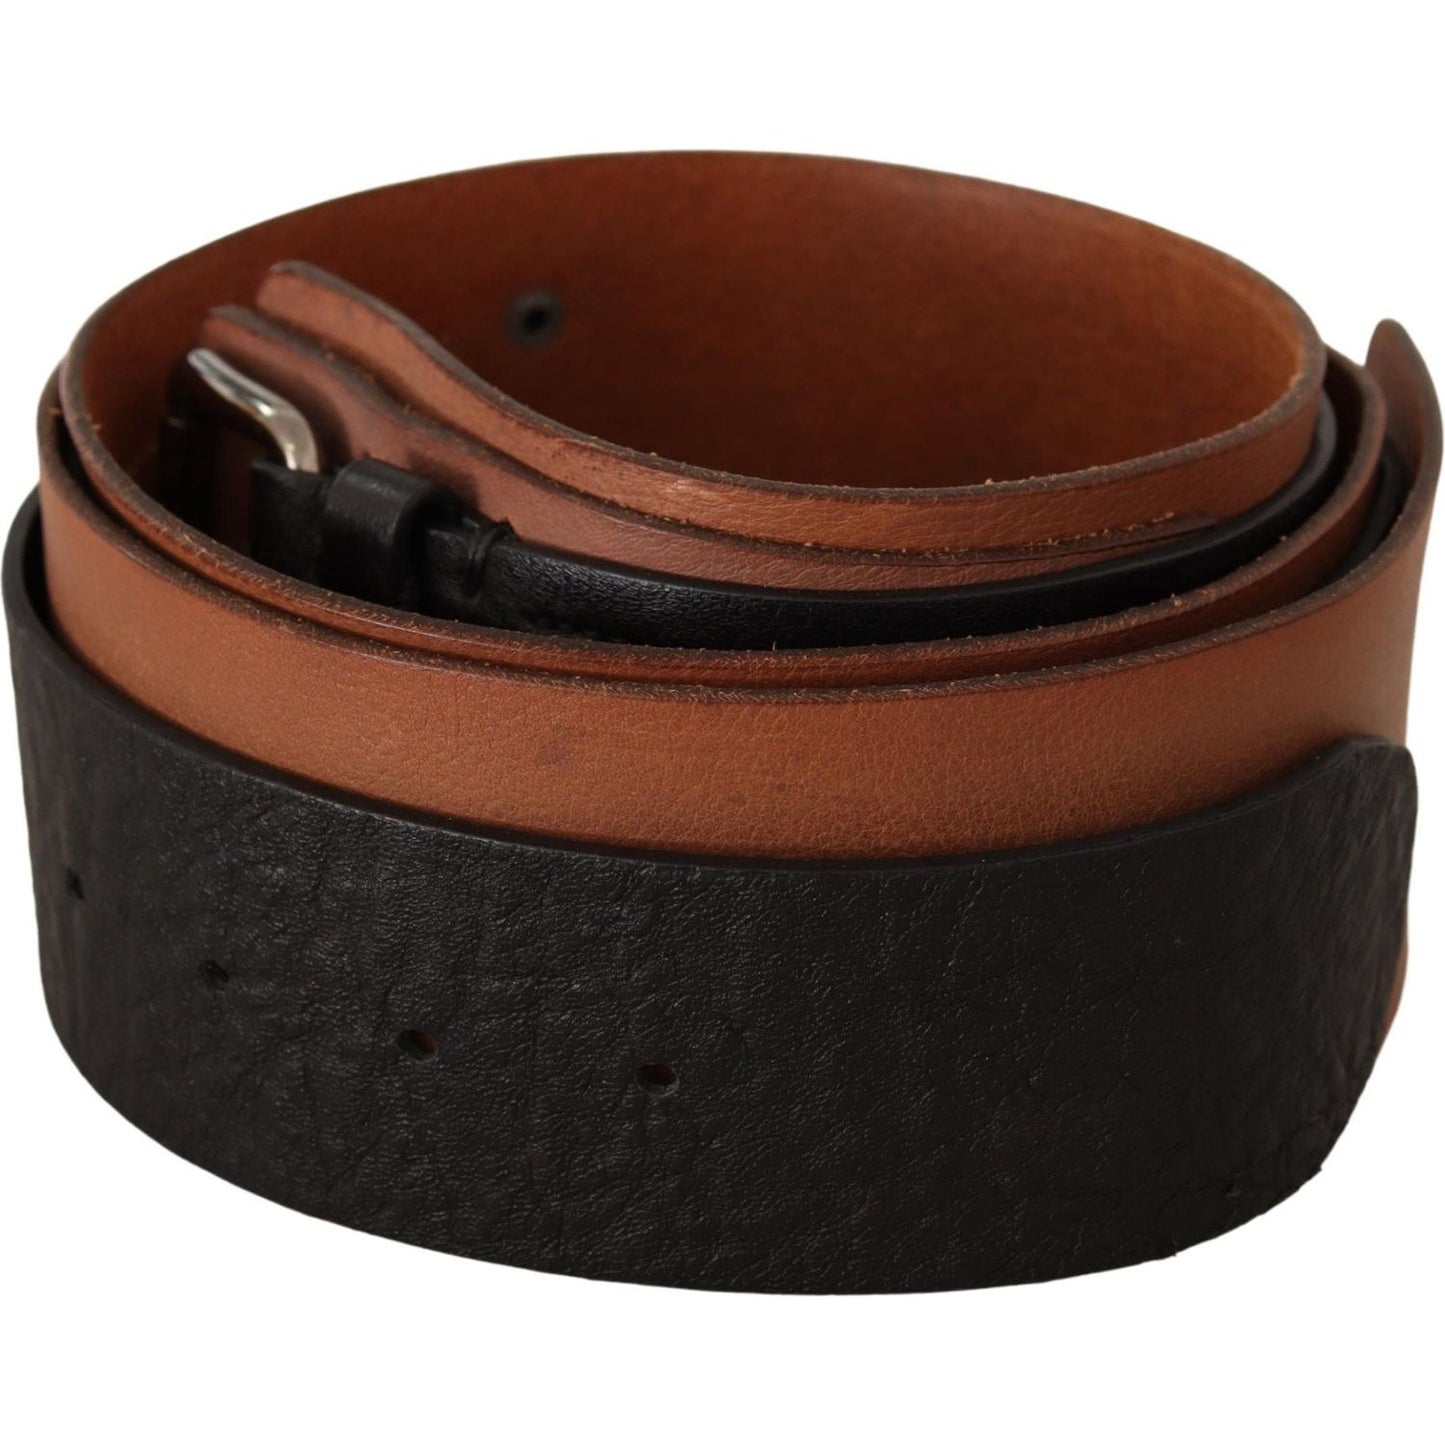 Costume National Elegant Dual-Tone Leather Fashion Belt WOMAN BELTS black-brown-leather-silver-buckle